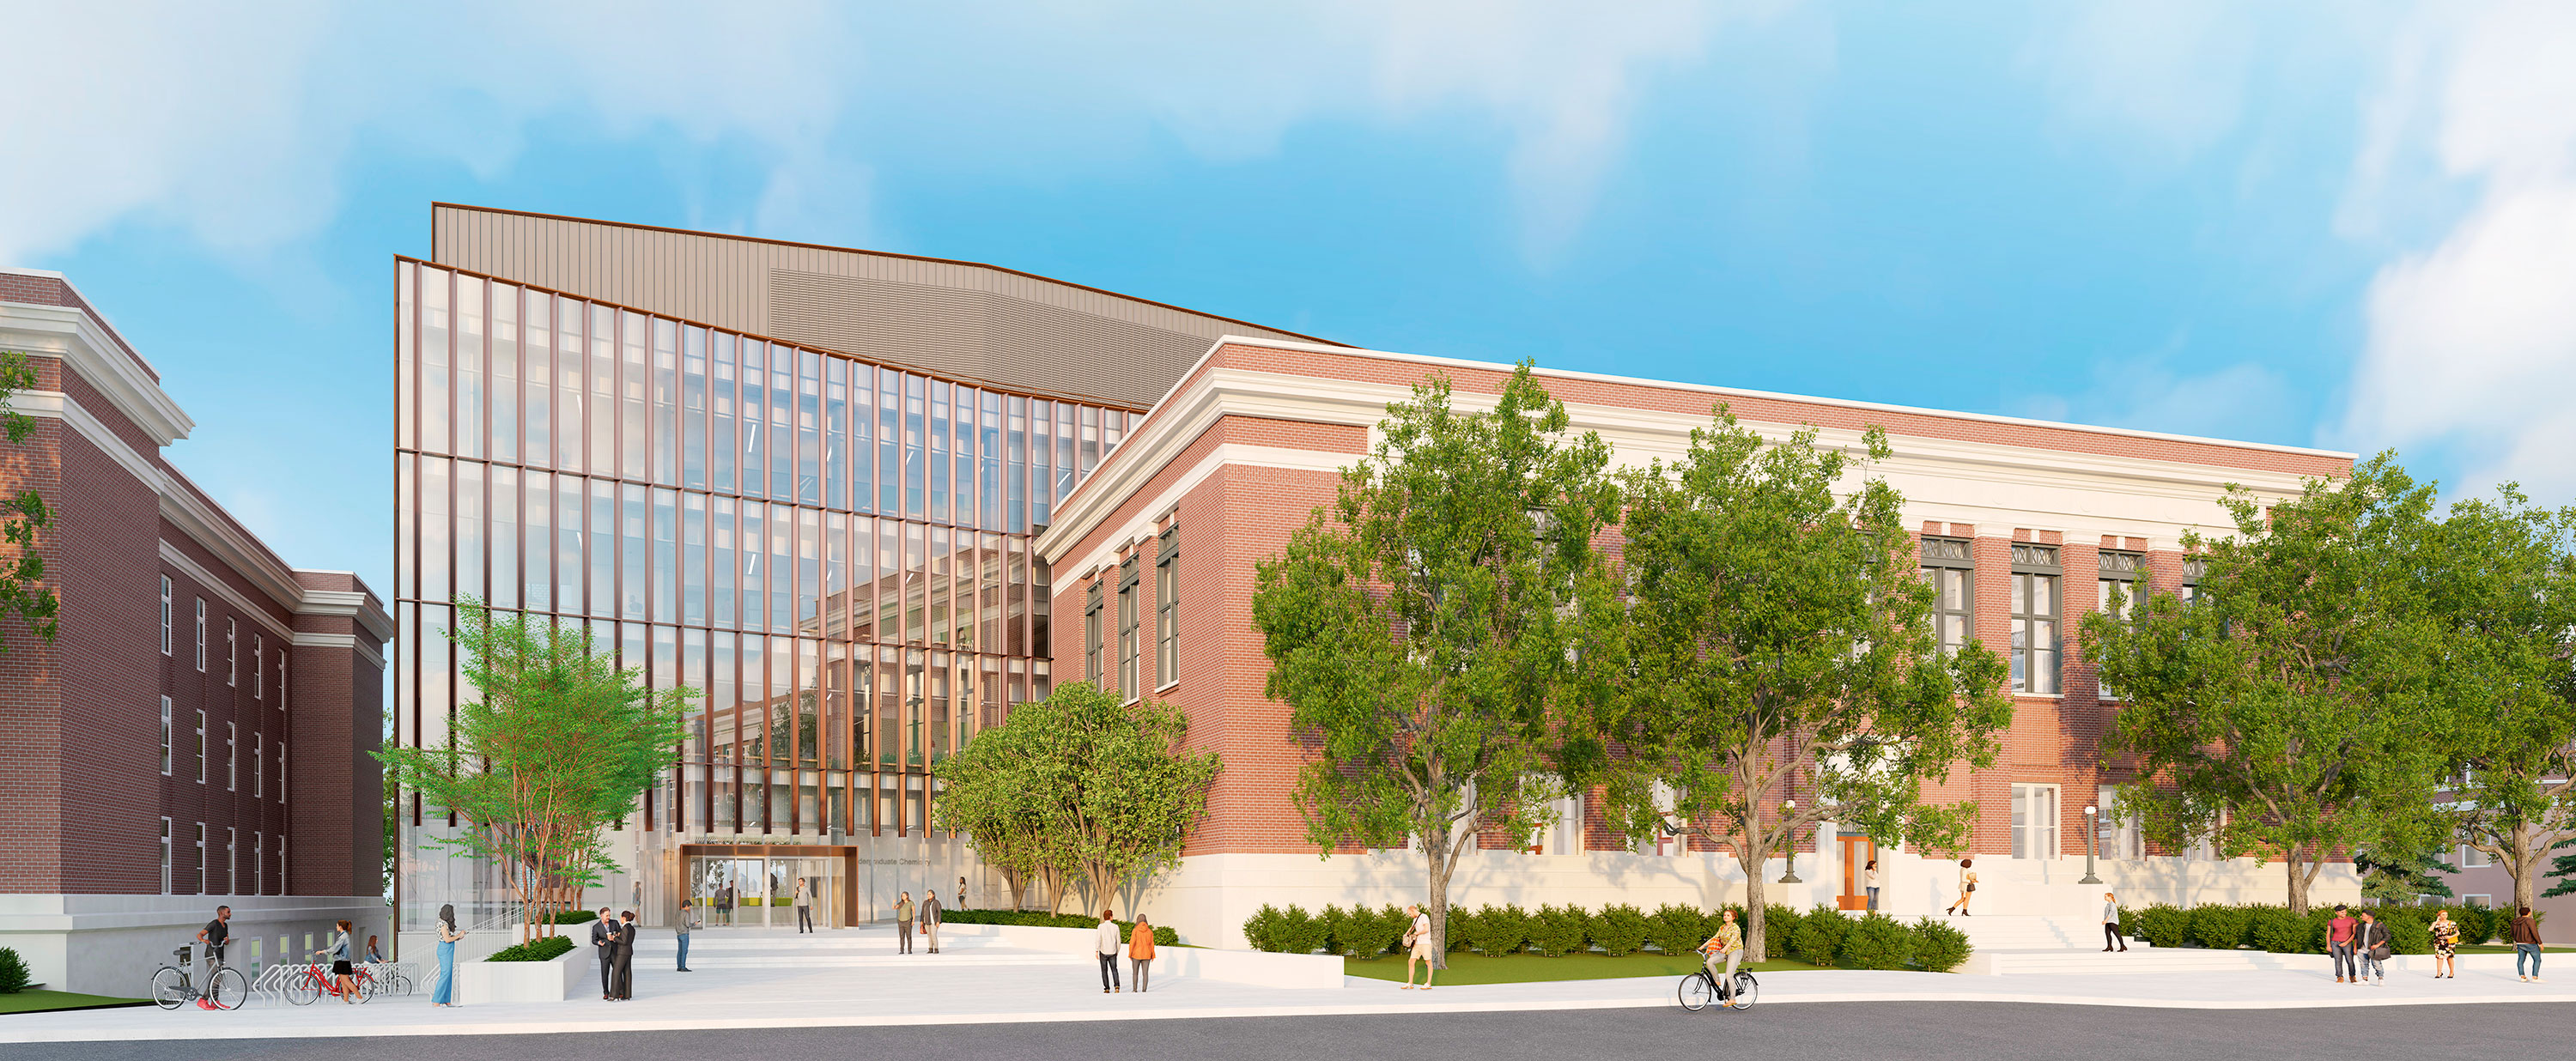 An illustration of the new Fraser Hall